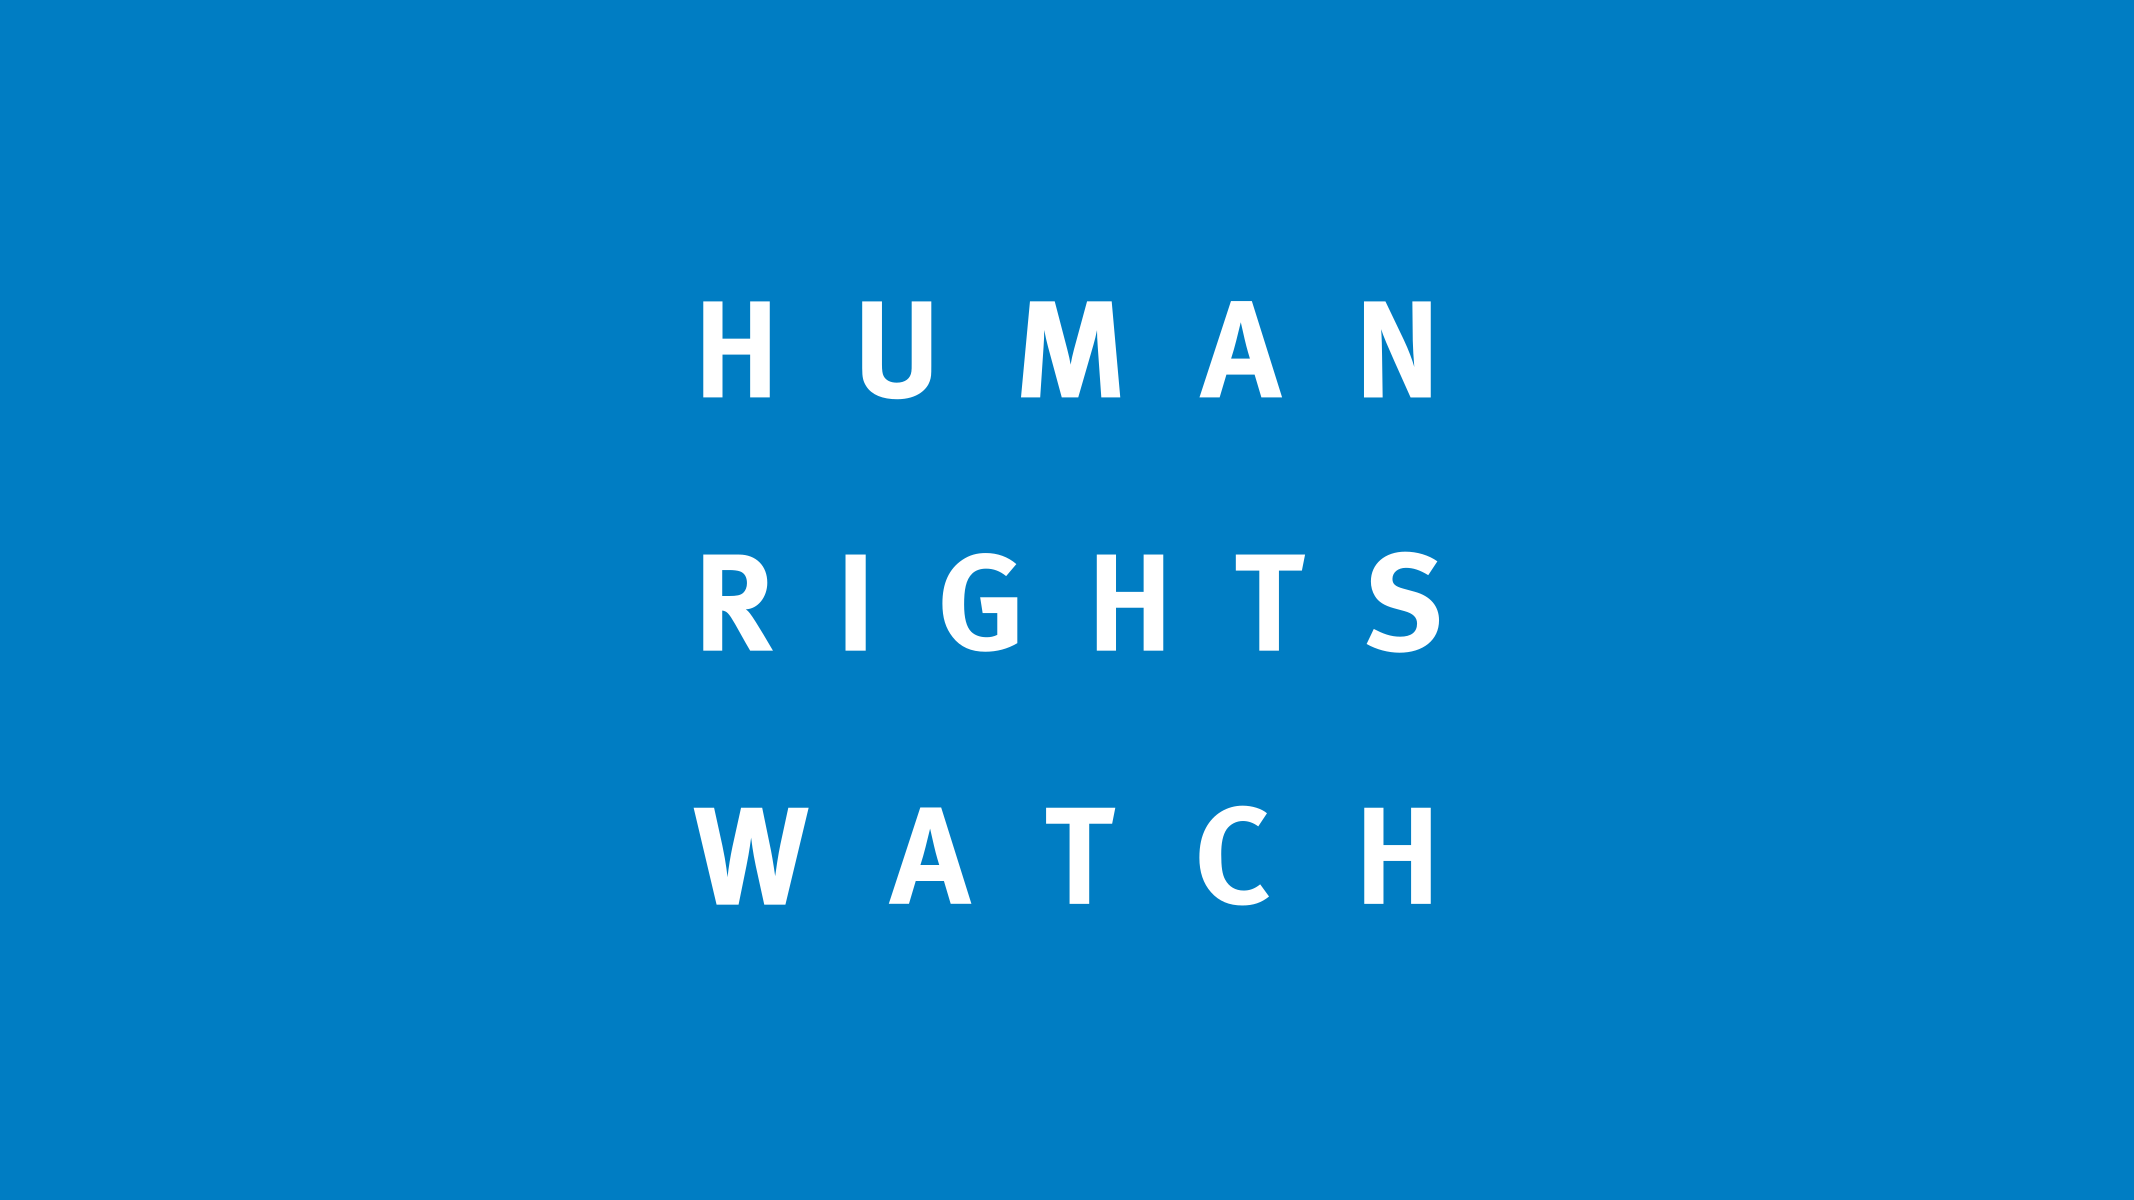 [human rights watch]